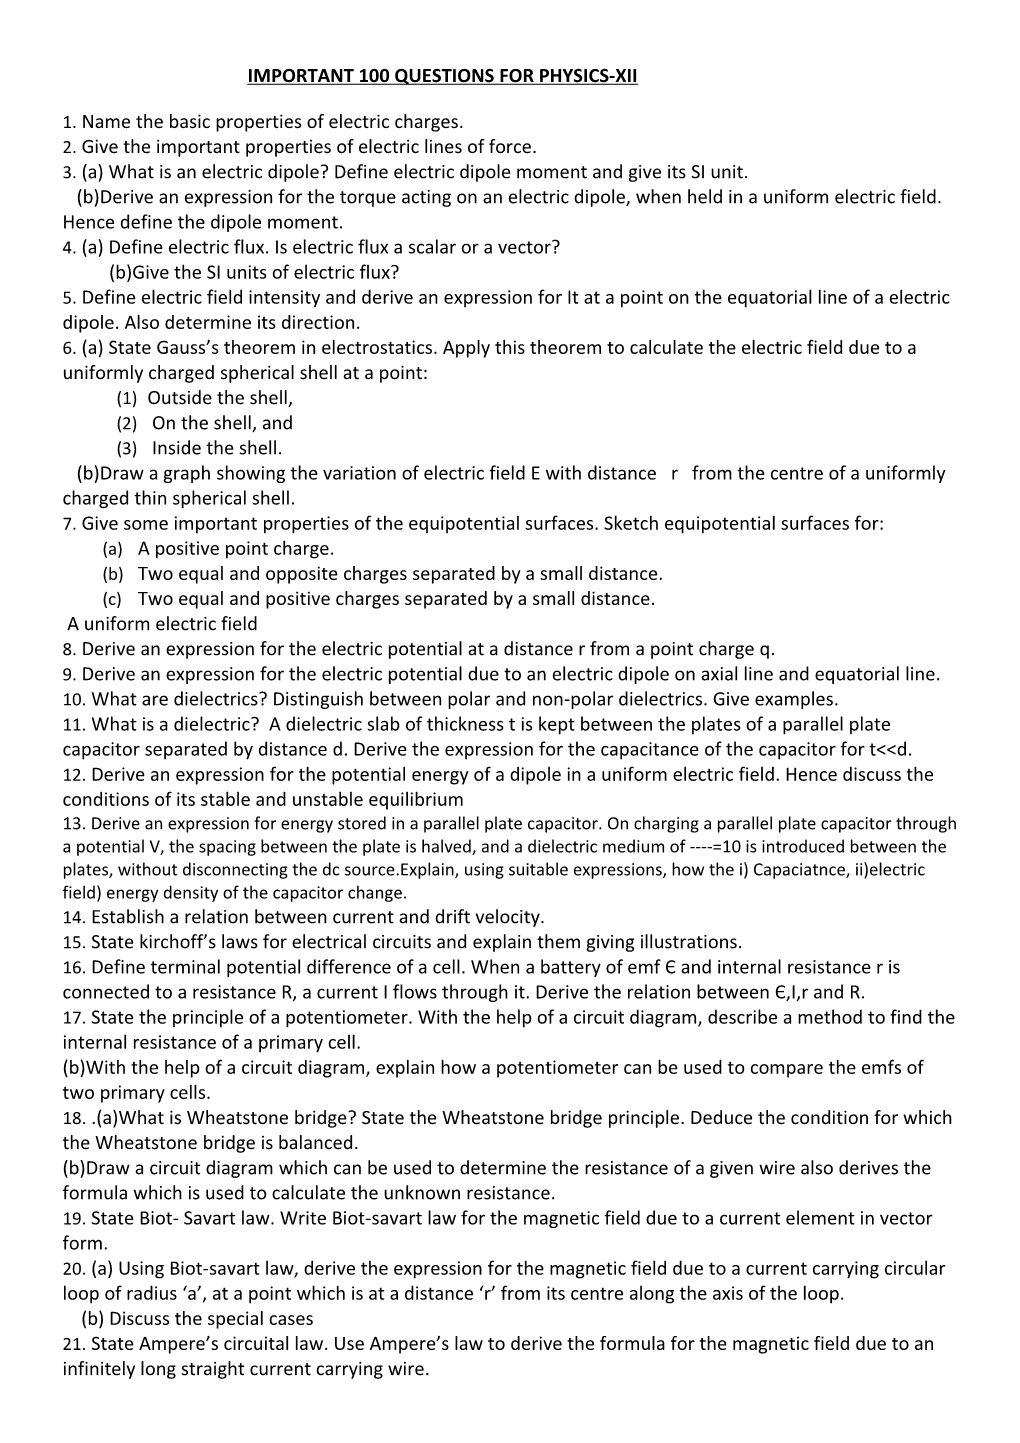 Important 100 Questions for Physics-Xii